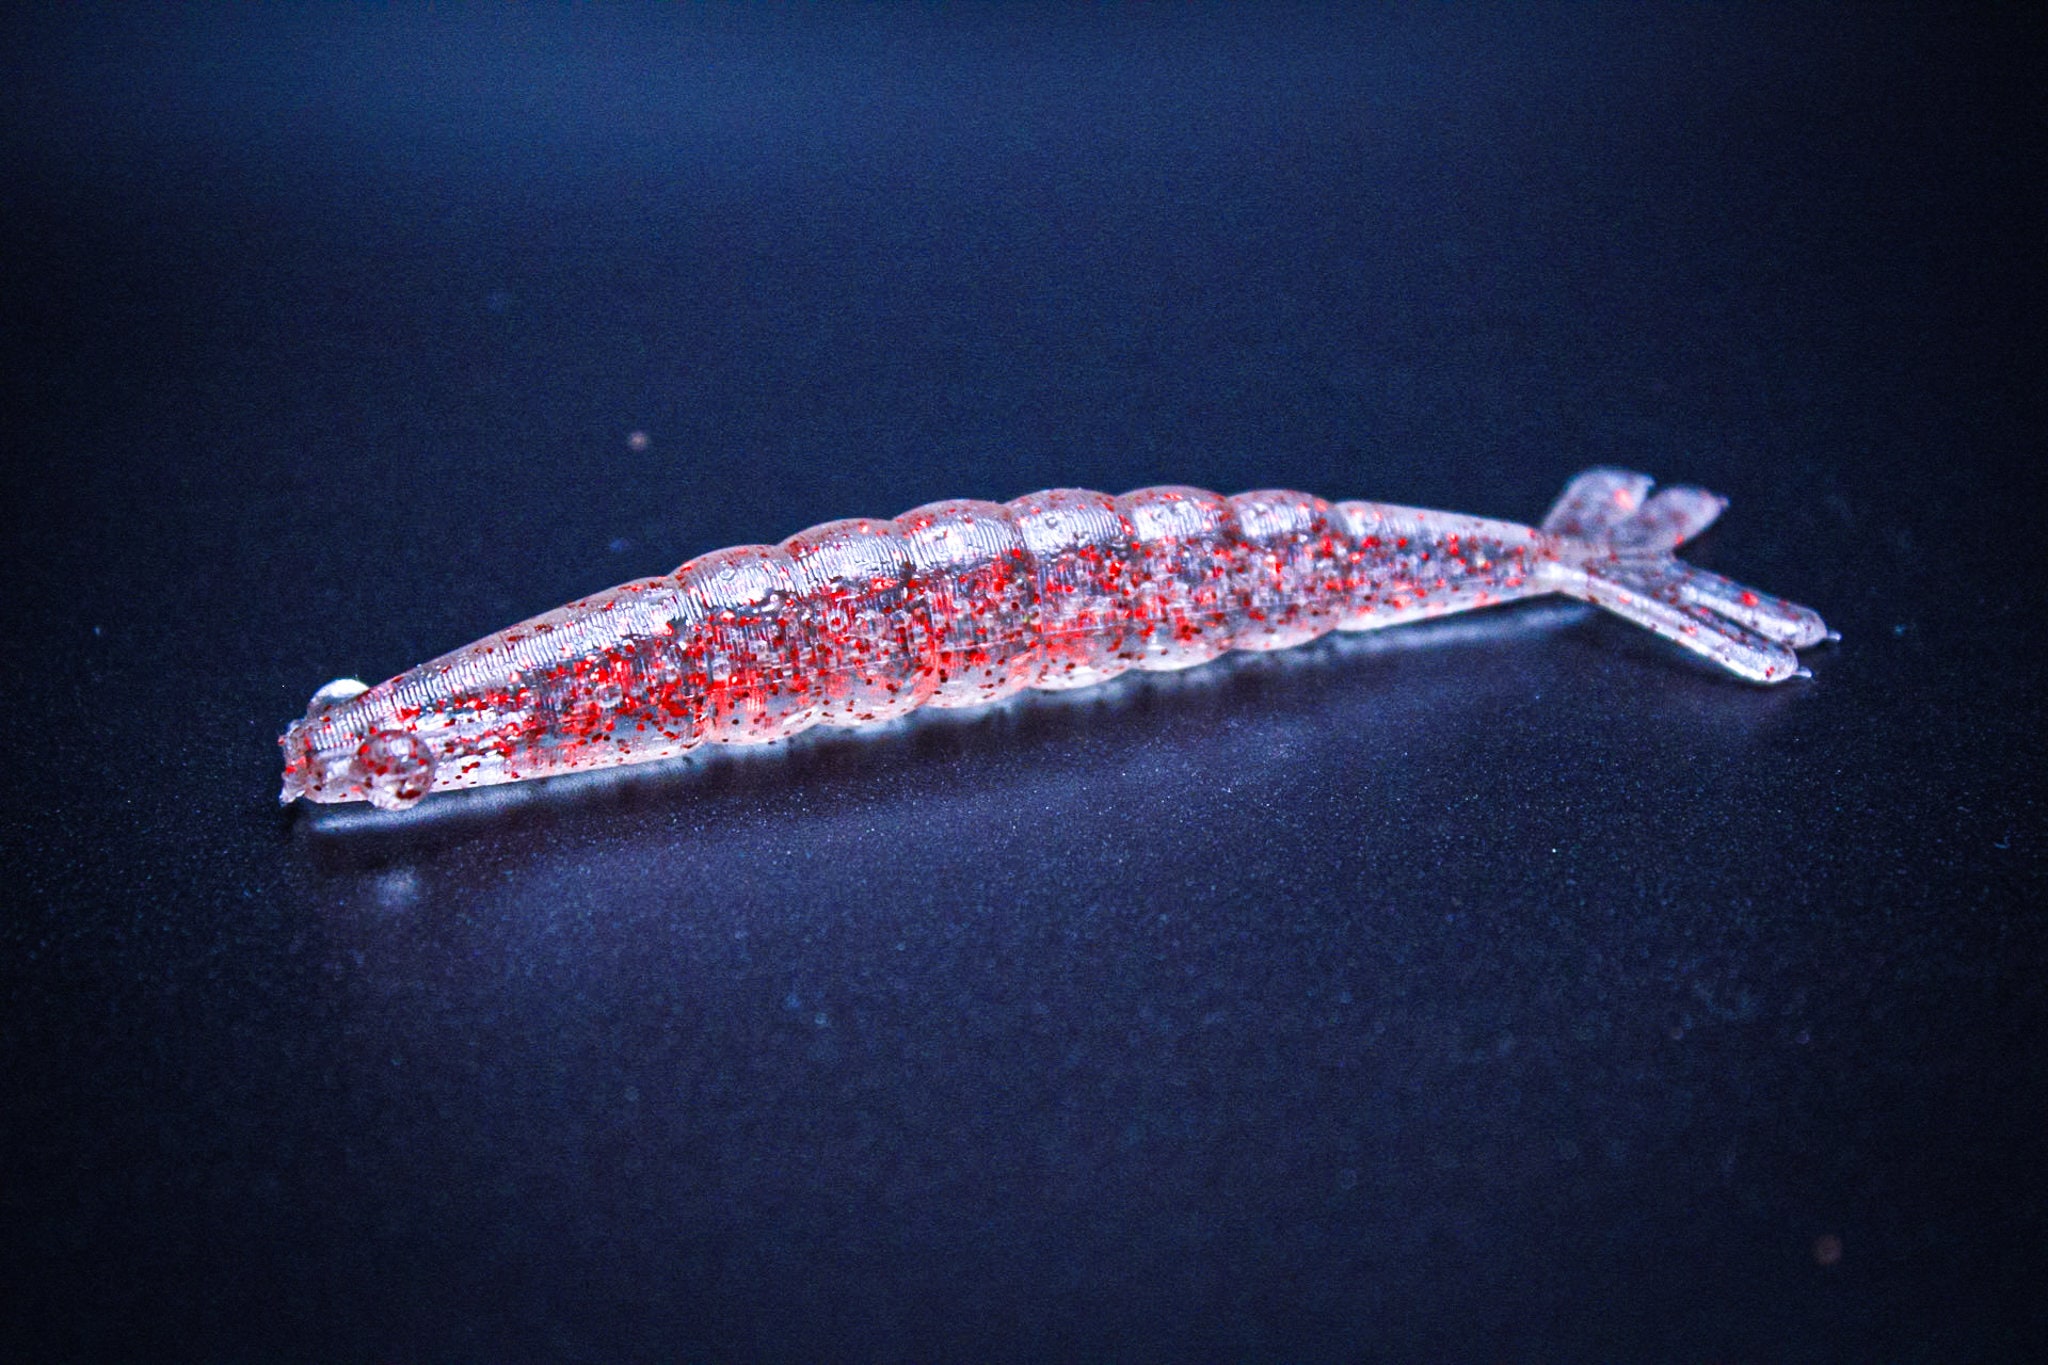 Gar Catcher Rope Lure With Spinner Blade Handmade in the USA 